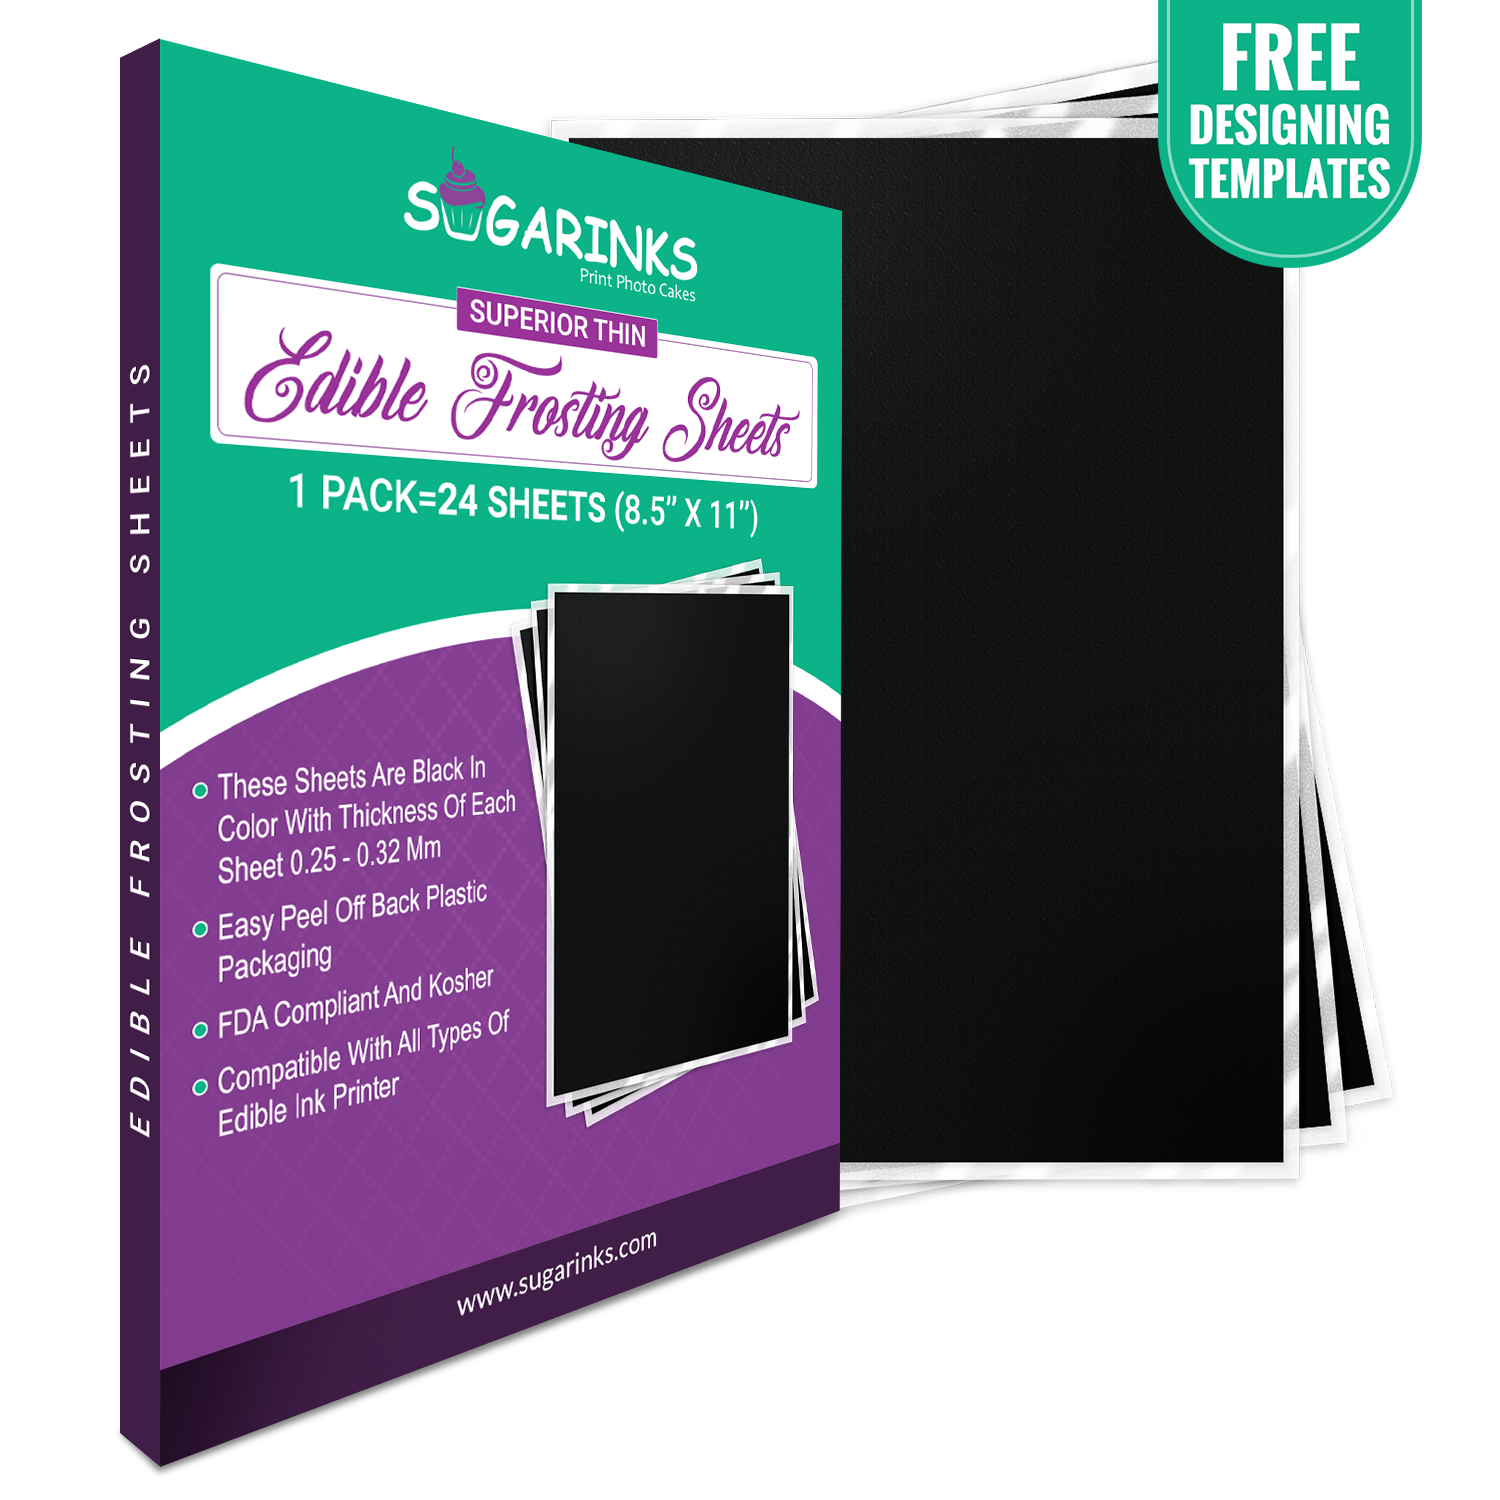 Sugarinks Premium Quality Superior Thin Black Frosting Sheets A4 Size (8.5”X11”) Pack of 24